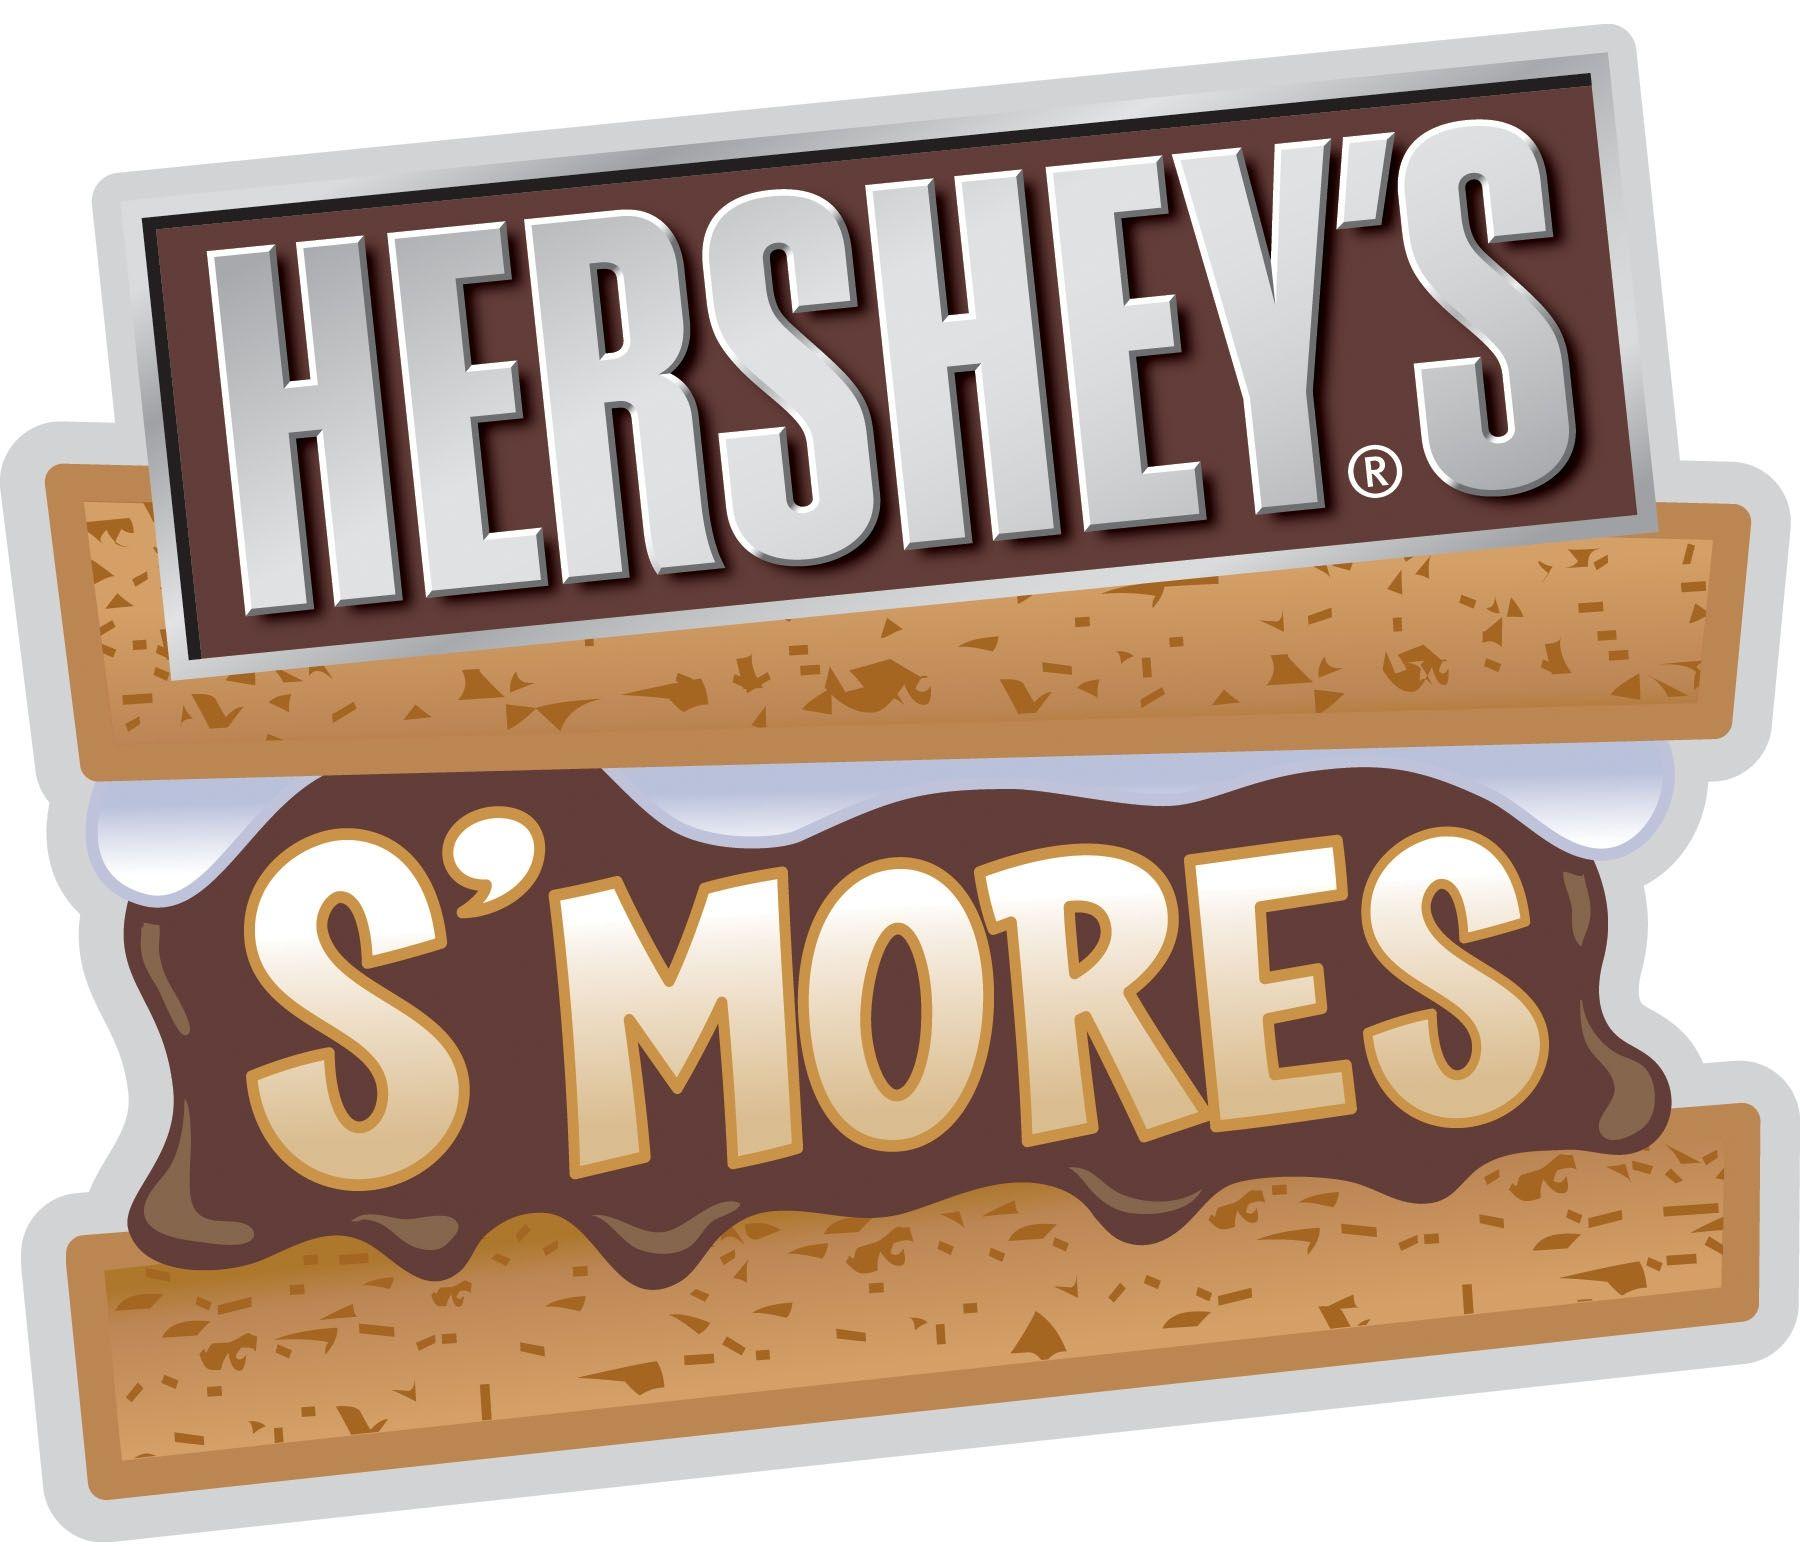 S'mores Logo - THE HERSHEY COMPANY CELEBRATES 80 YEARS OF S'MORES FUN